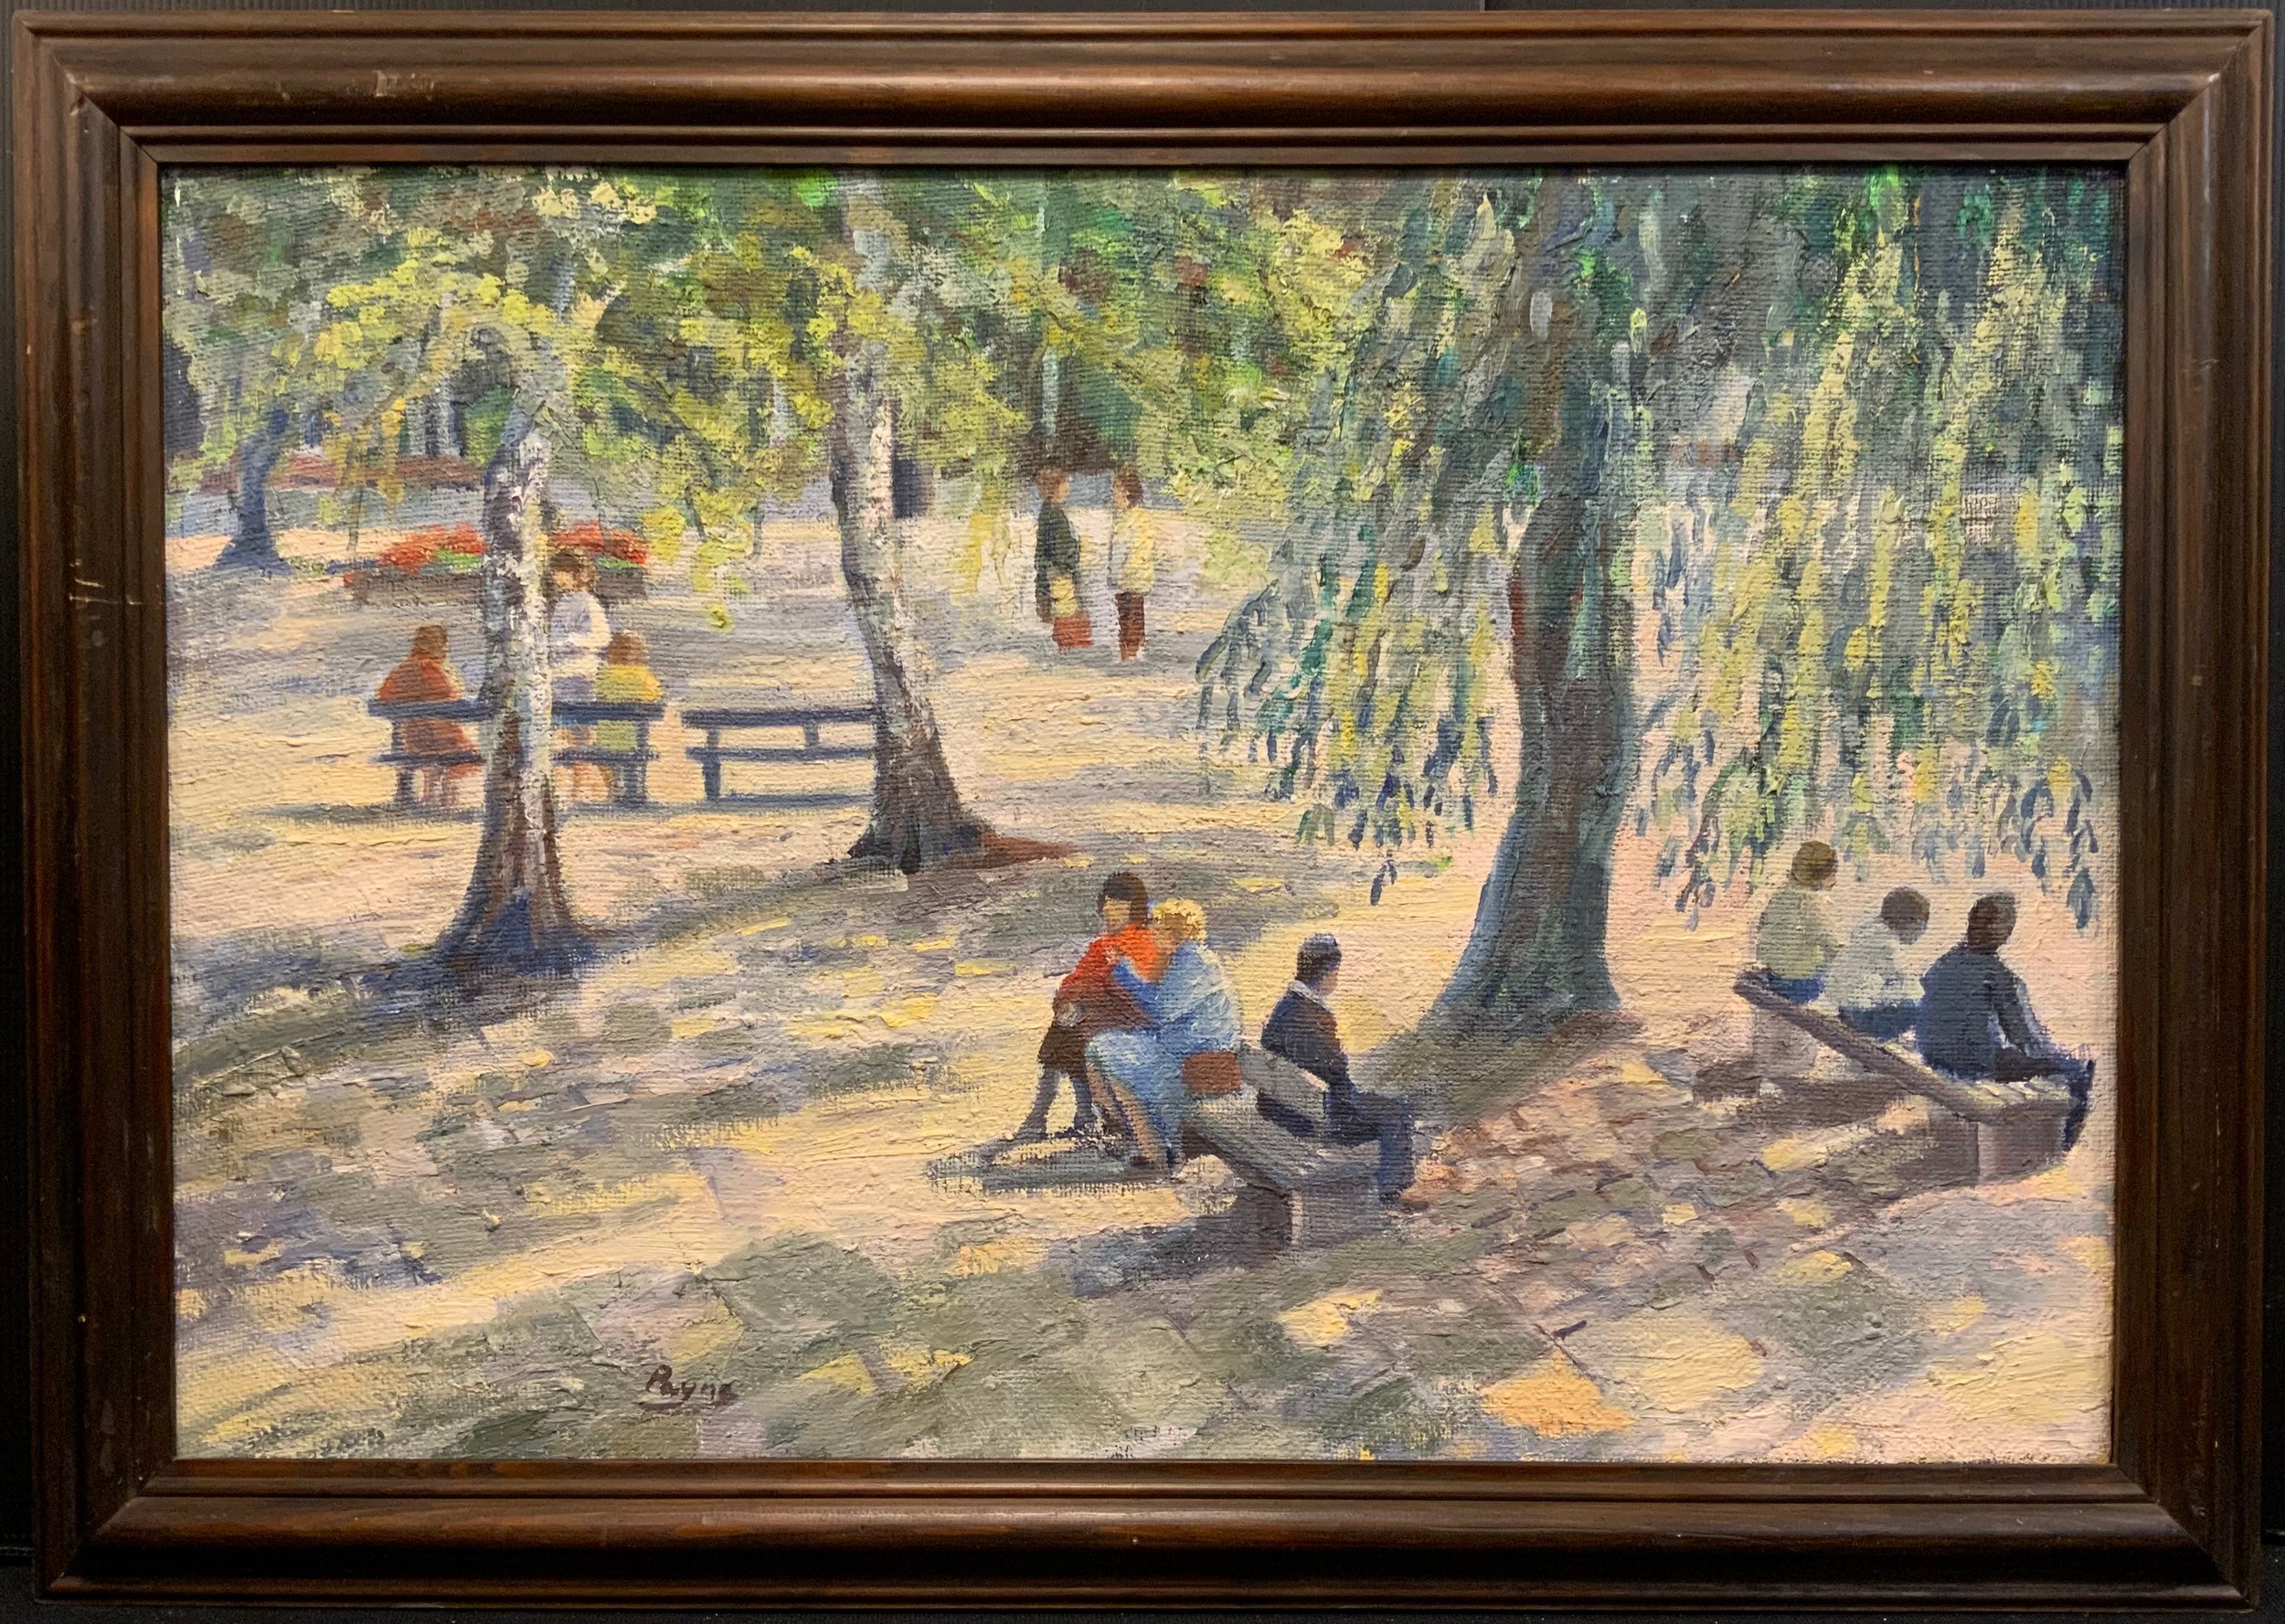 Gwen Payne, Town Square, signed, oil on canvas, 41cm x 61cm.